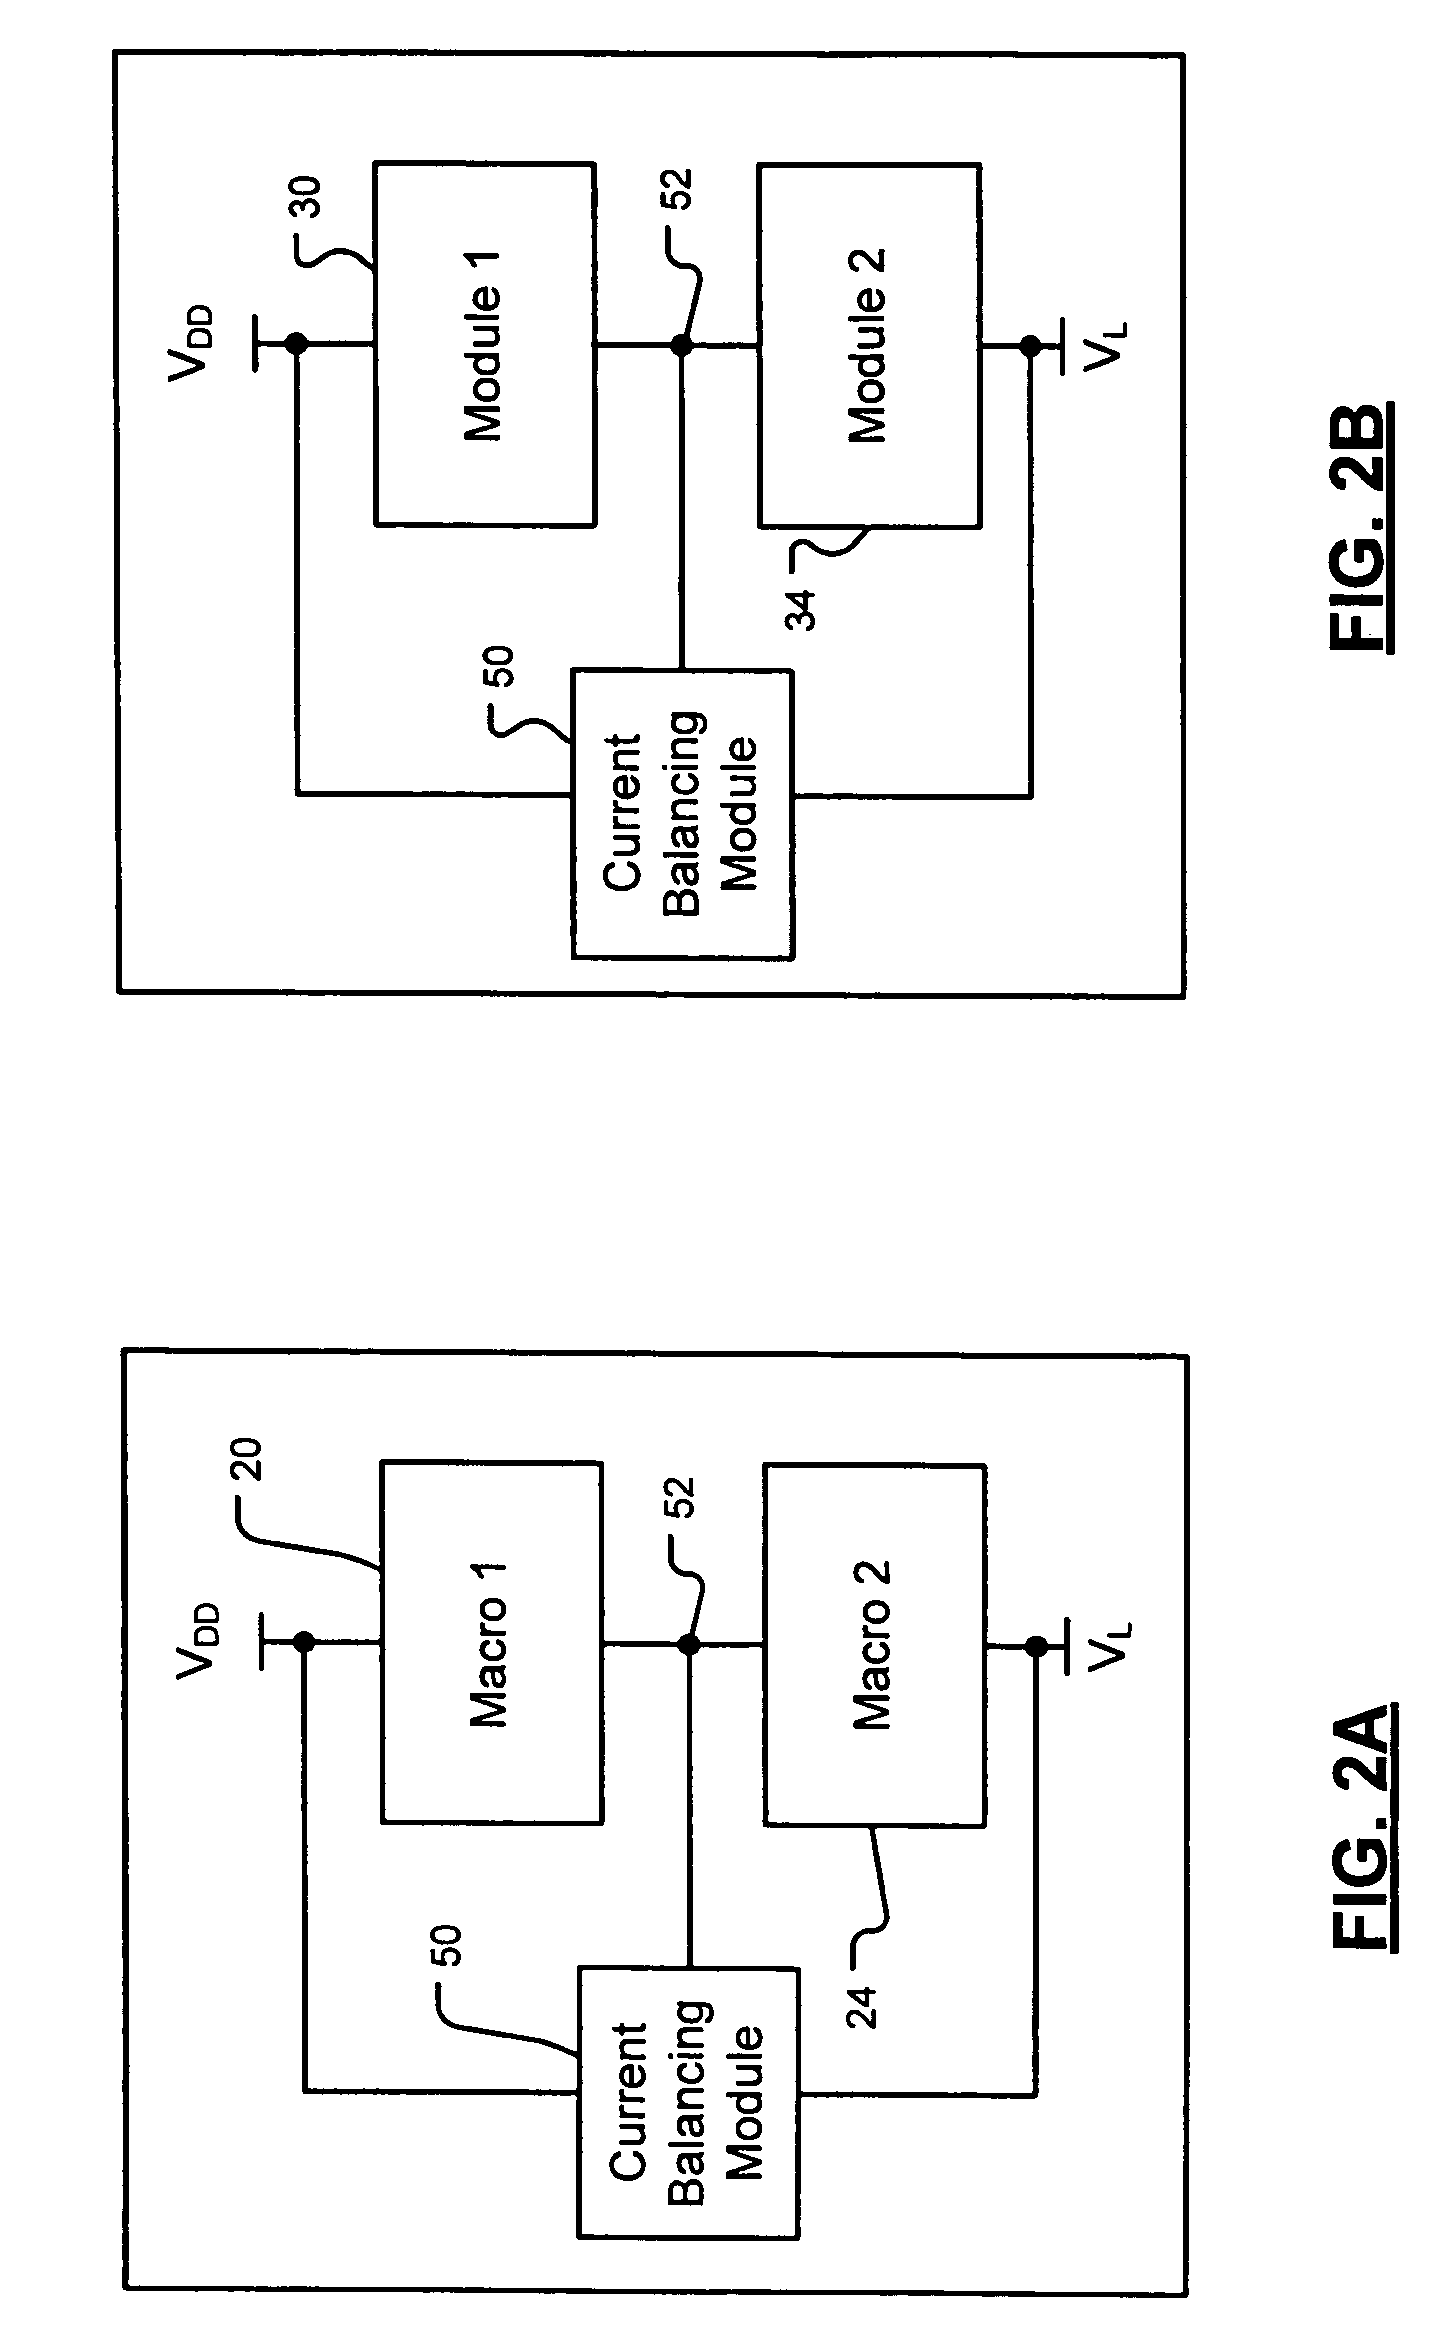 Low voltage logic operation using higher voltage supply levels